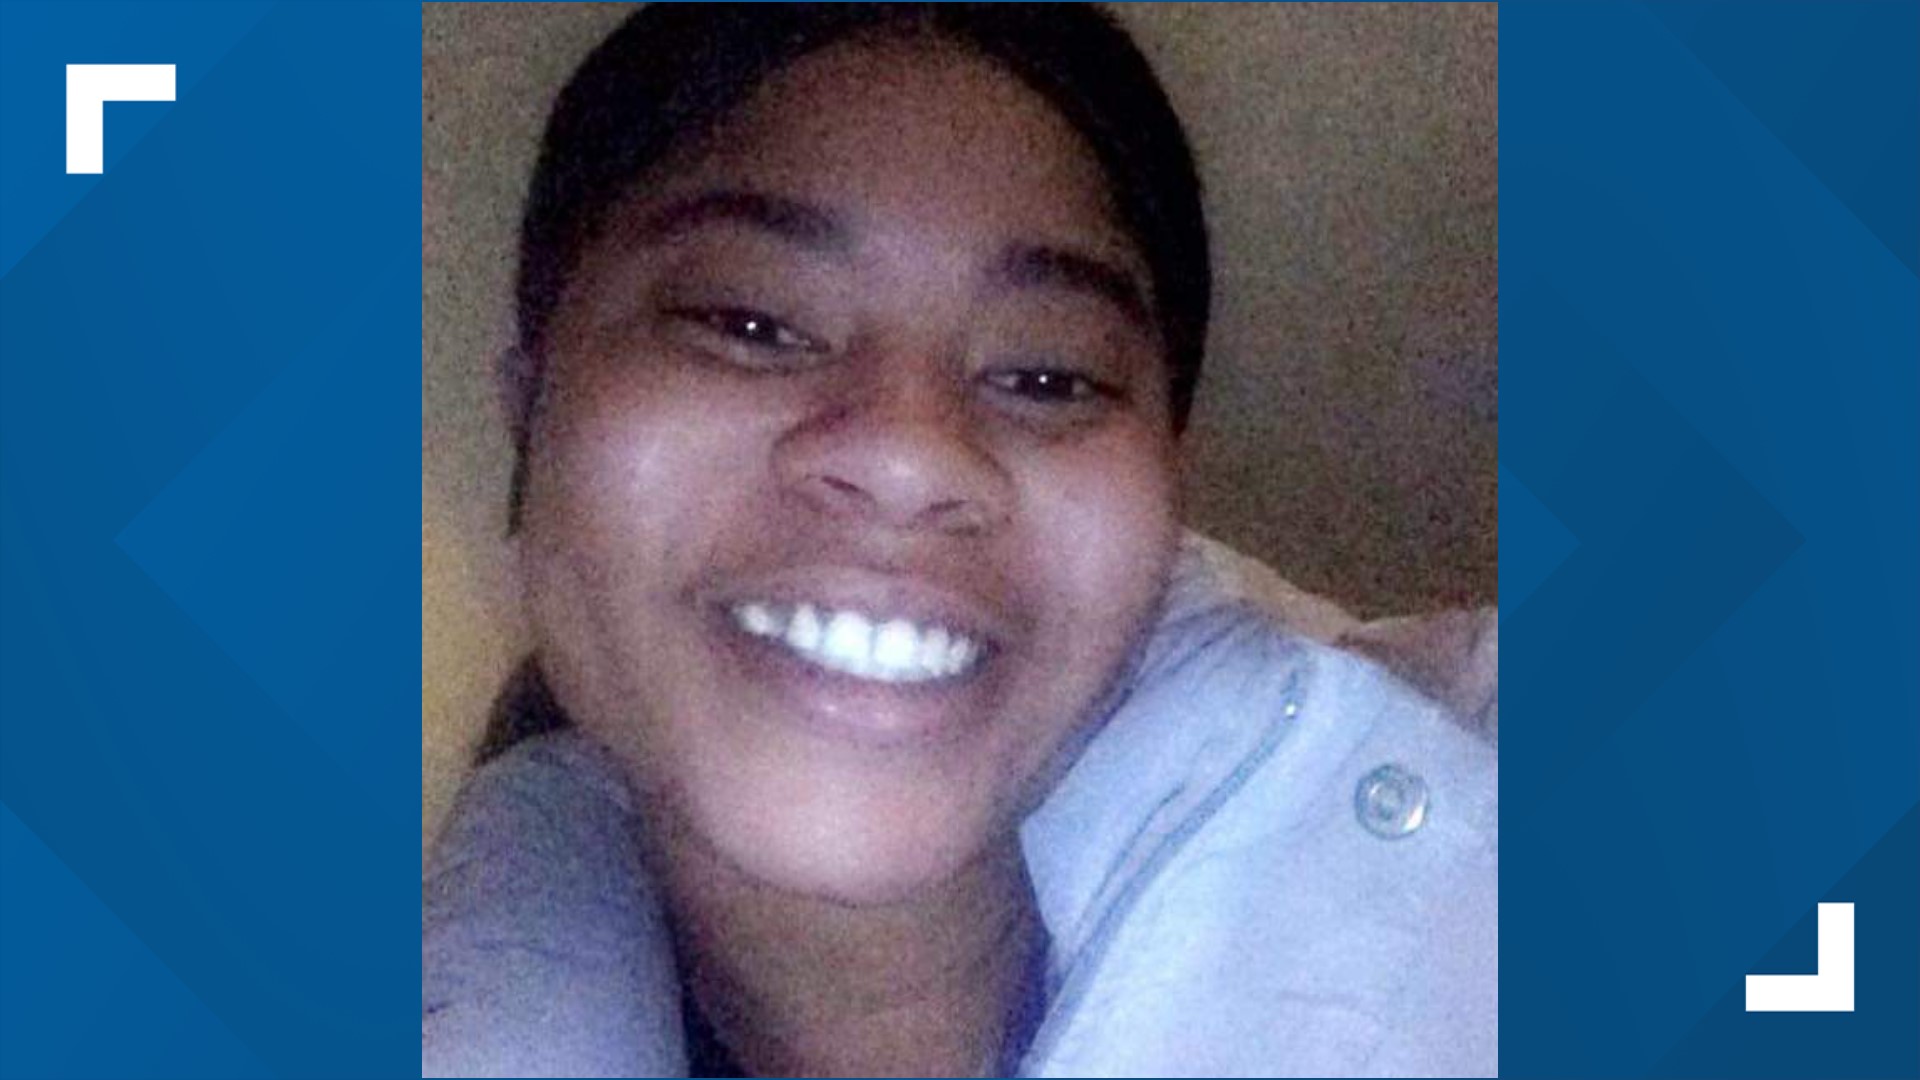 Masonique Saunders, 20, was one of two women who were shot near Saunders Park on Atcheson Street Saturday night, family members told 10TV.